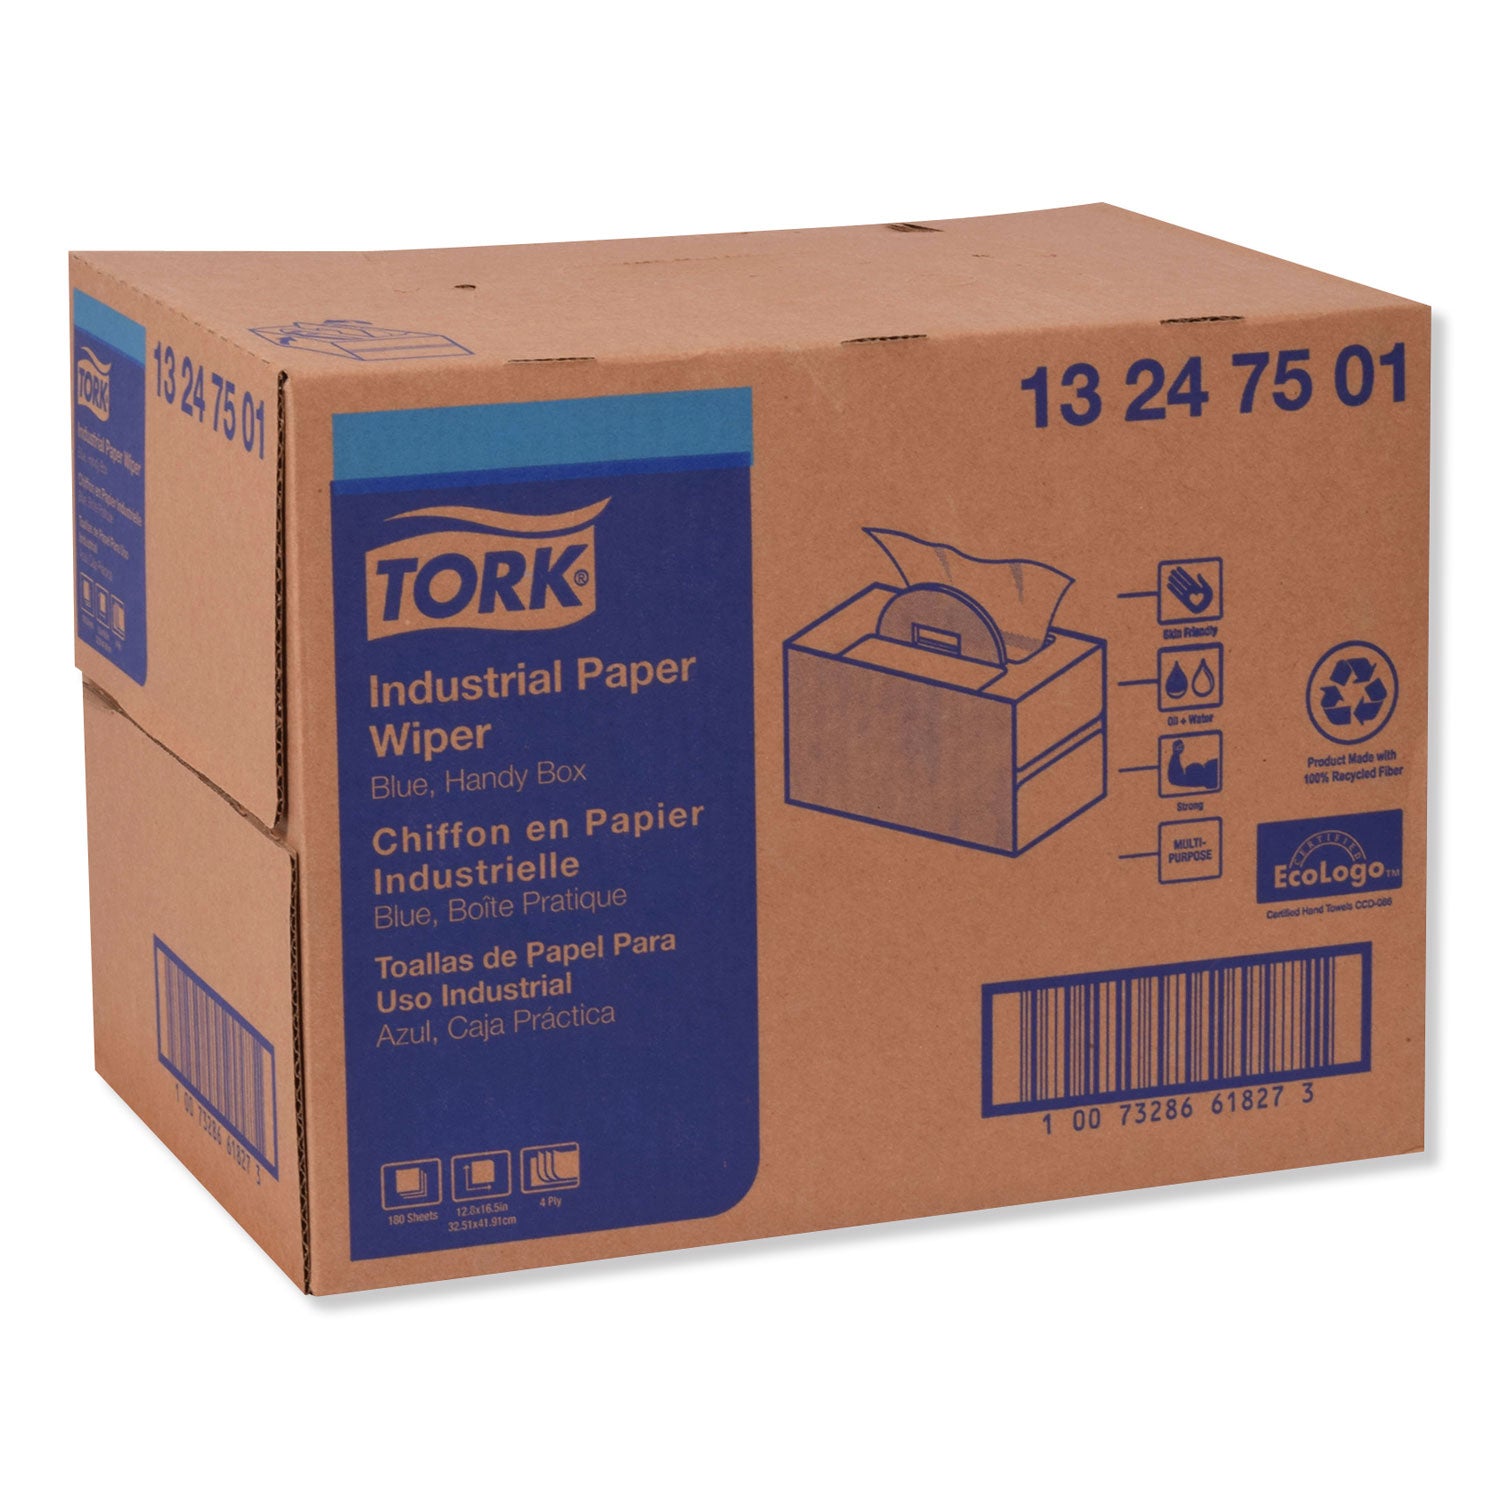 industrial-paper-wiper-4-ply-128-x-165-unscented-blue-180-carton_trk13247501 - 2